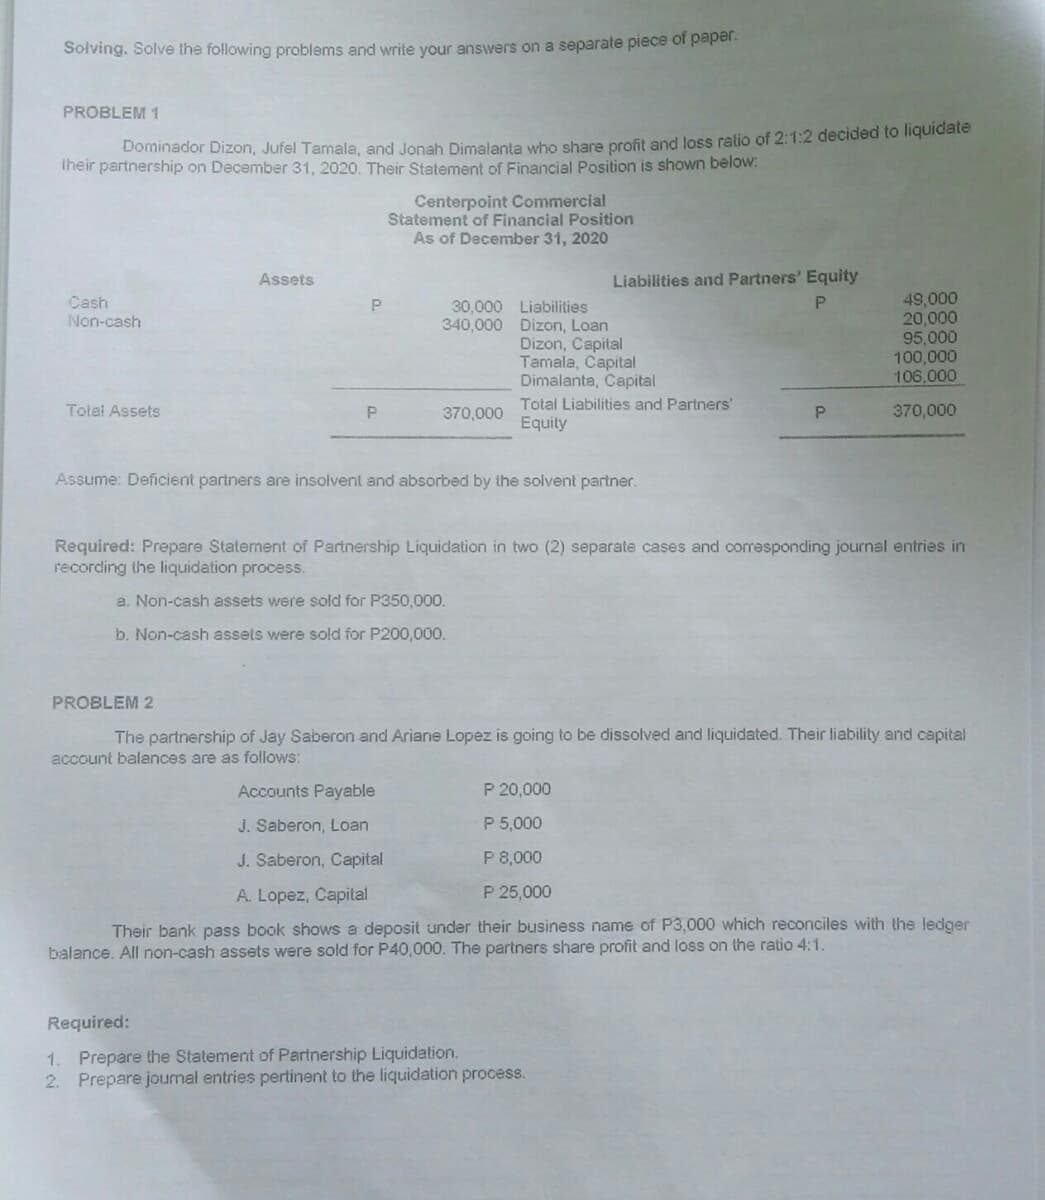 Solving. Solve the following problems and write your answers on a separate piece of pape
PROBLEM 1
Dominador Dizon, Jufel Tamala, and Jonah Dimalanta who share profit and Joss ratio of 2:1:2 decided to liquidate
iheir partnership on December 31, 2020. Their Statement of Financial Position is shown below:
Centerpoint Commercial
Statement of Financial Position
As of December 31, 2020
Assets
Liabilities and Partners' Equity
49,000
20,000
95,000
100,000
106,000
Cash
Non-cash
30,000 Liabilities
340,000 Dizon, Loan
Dizon, Capital
Tamala, Capital
Dimalanta, Capital
Total Liabilities and Partners'
Equity
Totel Assets
P.
370,000
370,000
Assume: Deficient partners are insolvent and absorbed by the solvent partner.
Required: Prepare Statement of Partnership Liquidation in two (2) separate cases and corresponding journal entries in
recording the liquidation process.
a. Non-cash assets were sold for P350,000.
b. Non-cash assets were sold for P200,000.
PROBLEM 2
The partnership of Jay Saberon and Ariane Lopez is going to be dissolved and liquidated. Their liability and capital
account balances are as follows:
Accounts Payable
P 20,000
J. Saberon, Loan
P 5,000
J. Saberon, Capital
P 8,000
A. Lopez, Capital
P 25,000
Their bank pass book shows a deposit under their business name of P3,000 which reconciles with the ledger
balance. All non-cash assets were sold for P40,000. The partners share profit and loss on the ratio 4:1.
Required:
1. Prepare the Statement of Partnership Liquidation.
2. Prepare joumal entries pertinent to the liquidation process.
